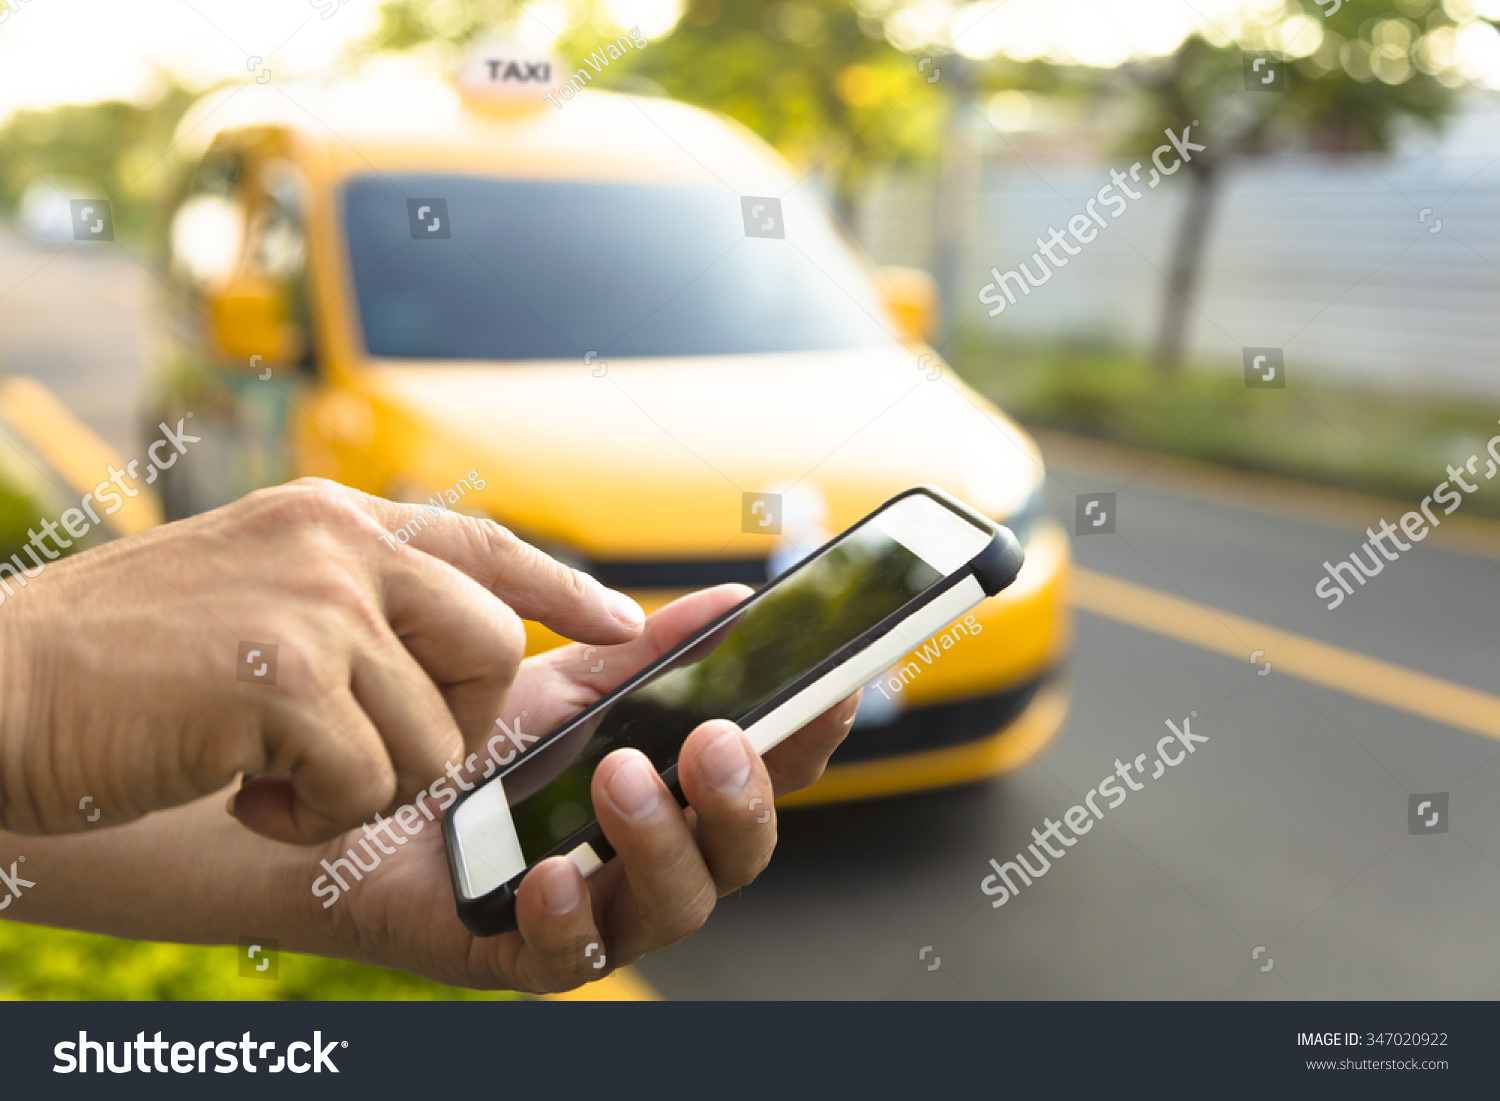 Man orders a taxi from his cell phone #347020922